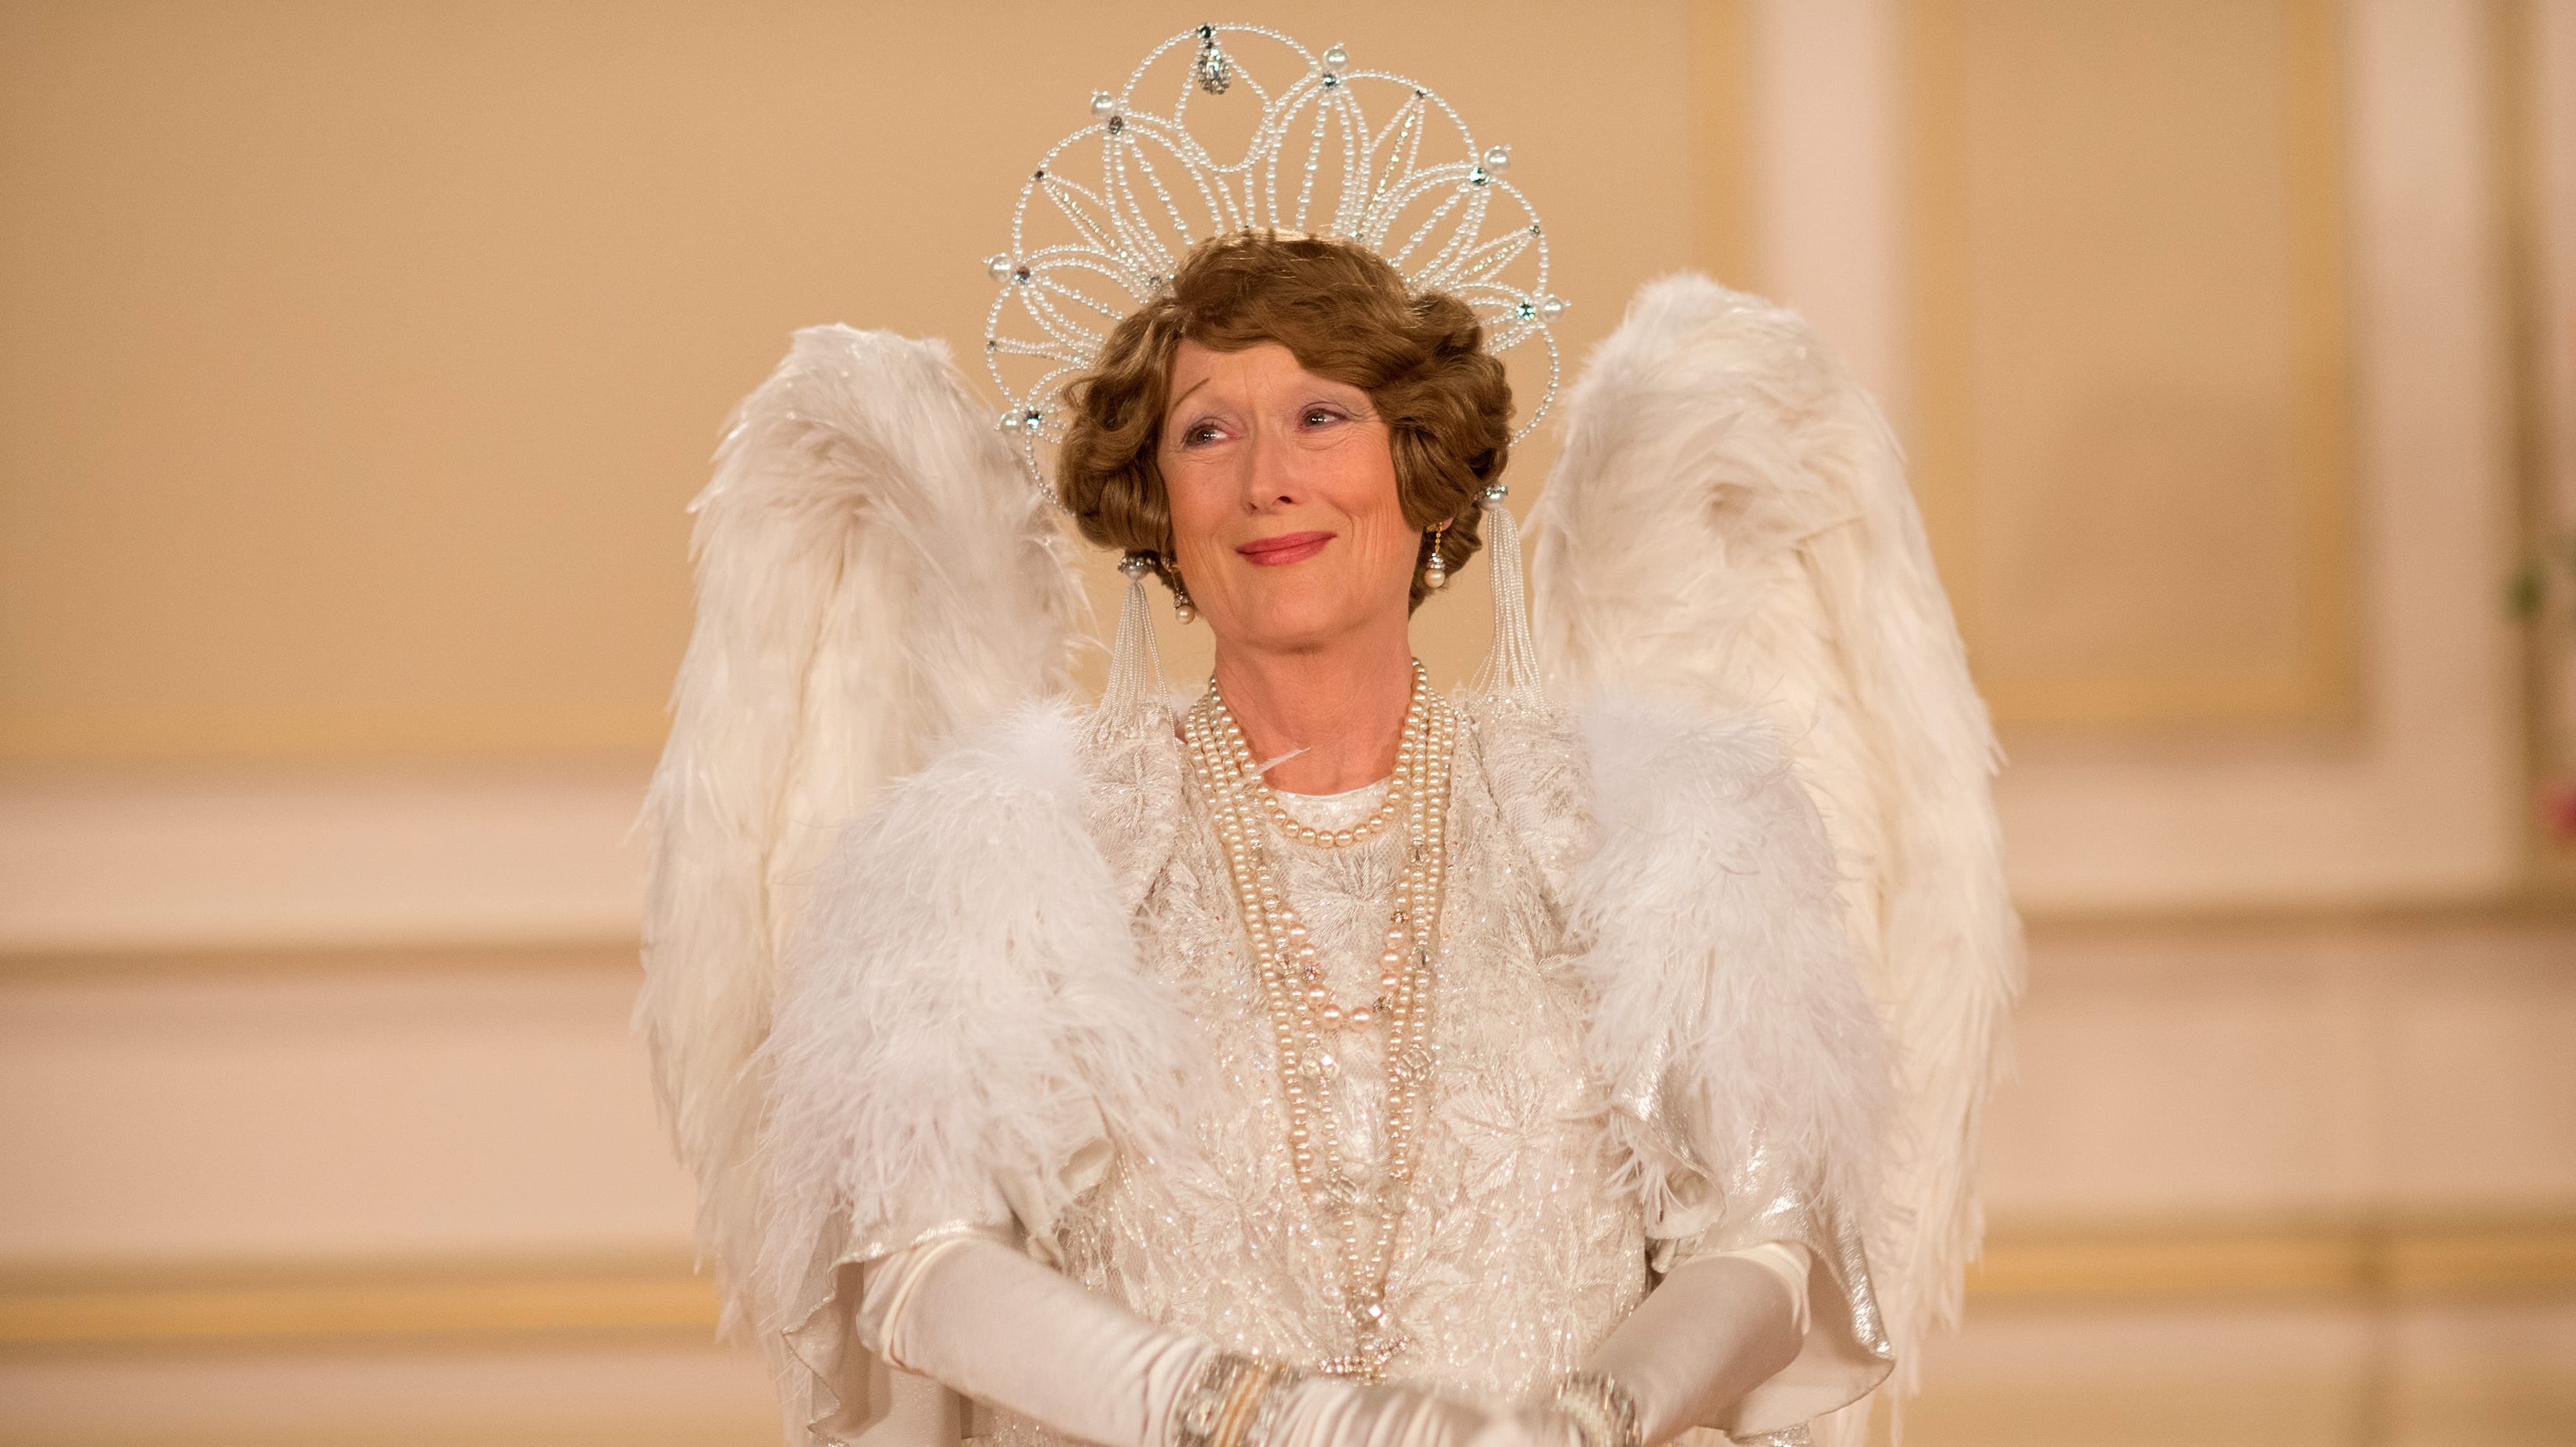 Florence Foster Jenkins 2016 123movies